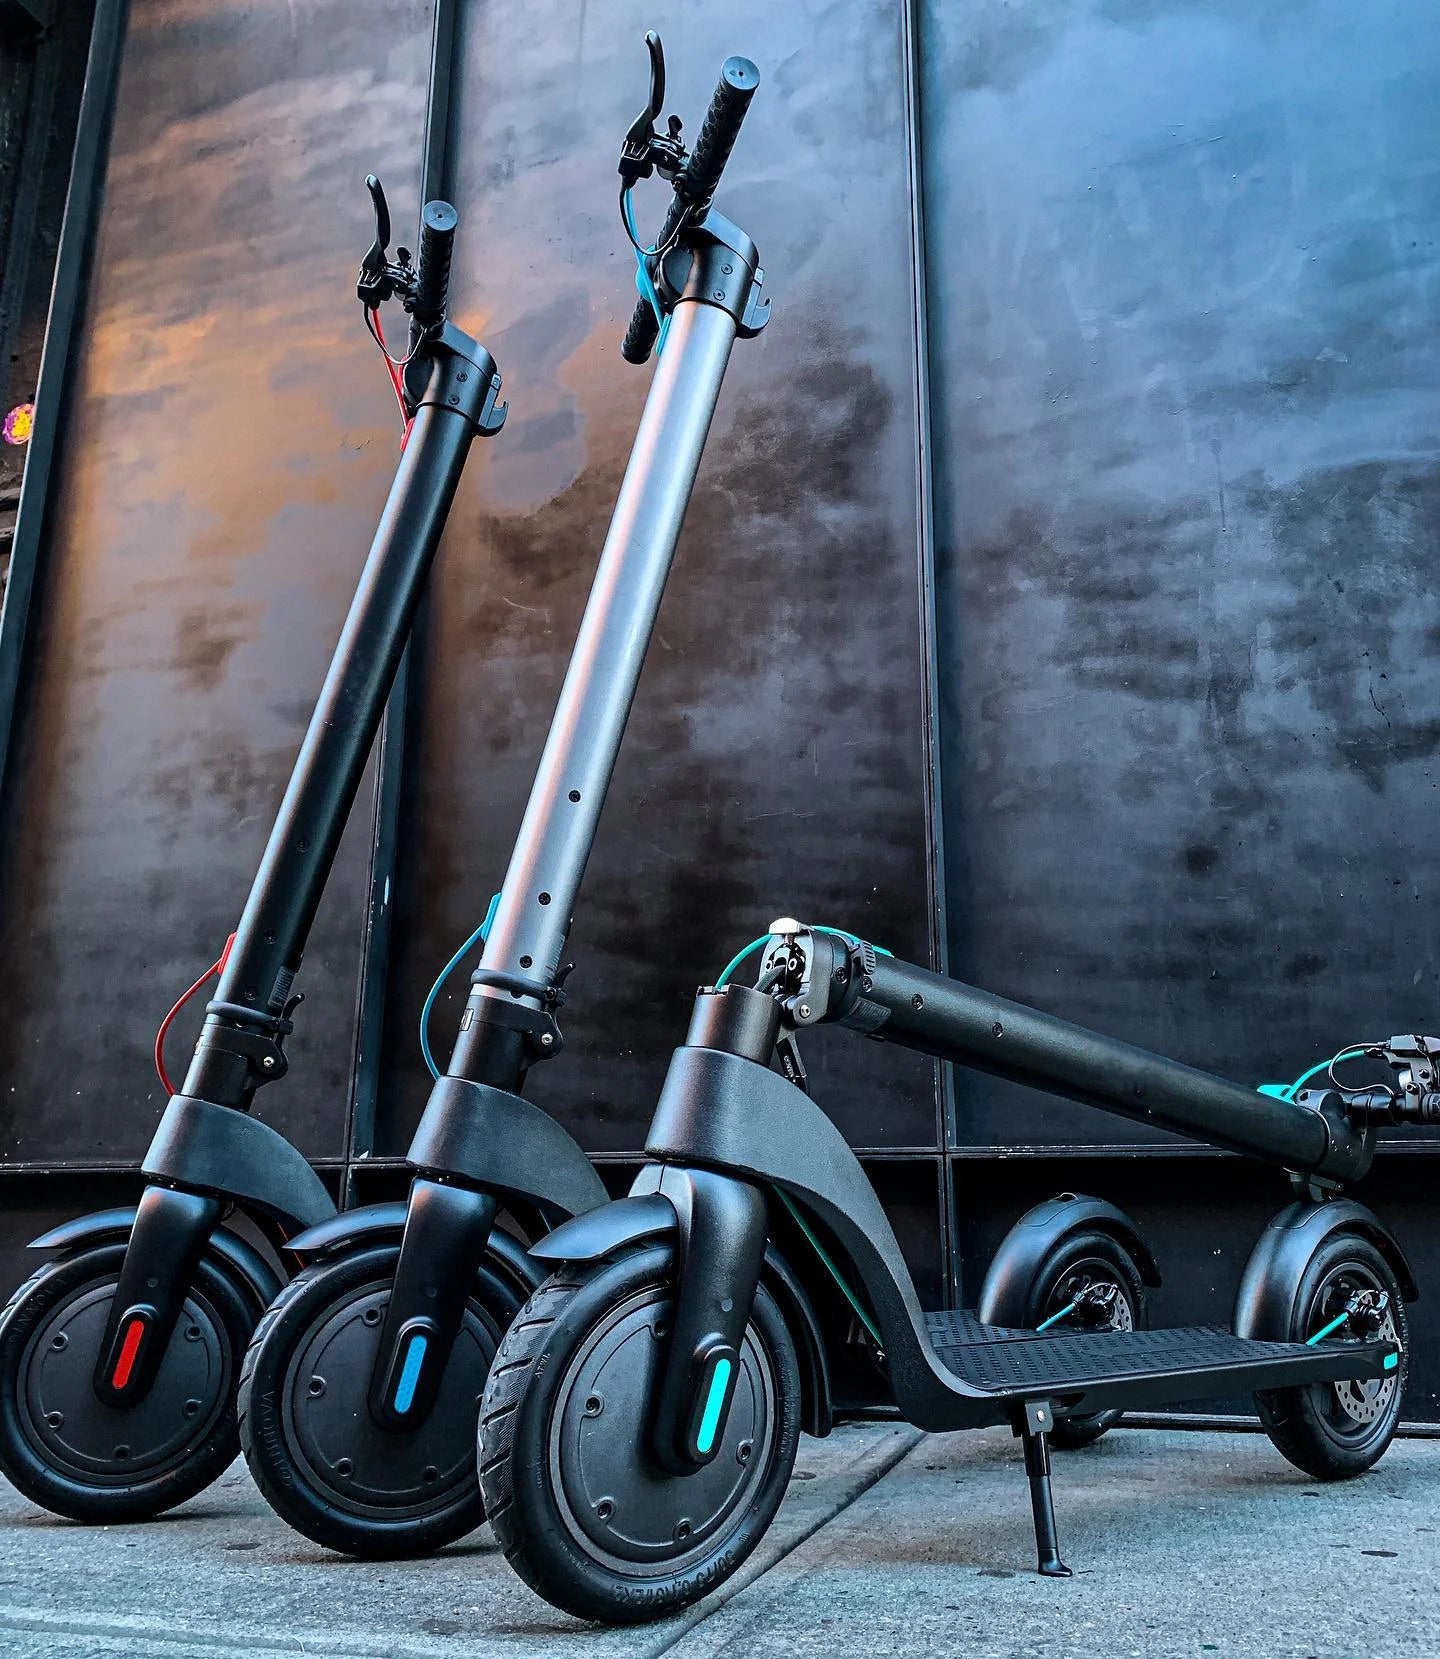 X7 Adults Electric Scooter,8.5” Escooter 15 Miles Range,15MPH